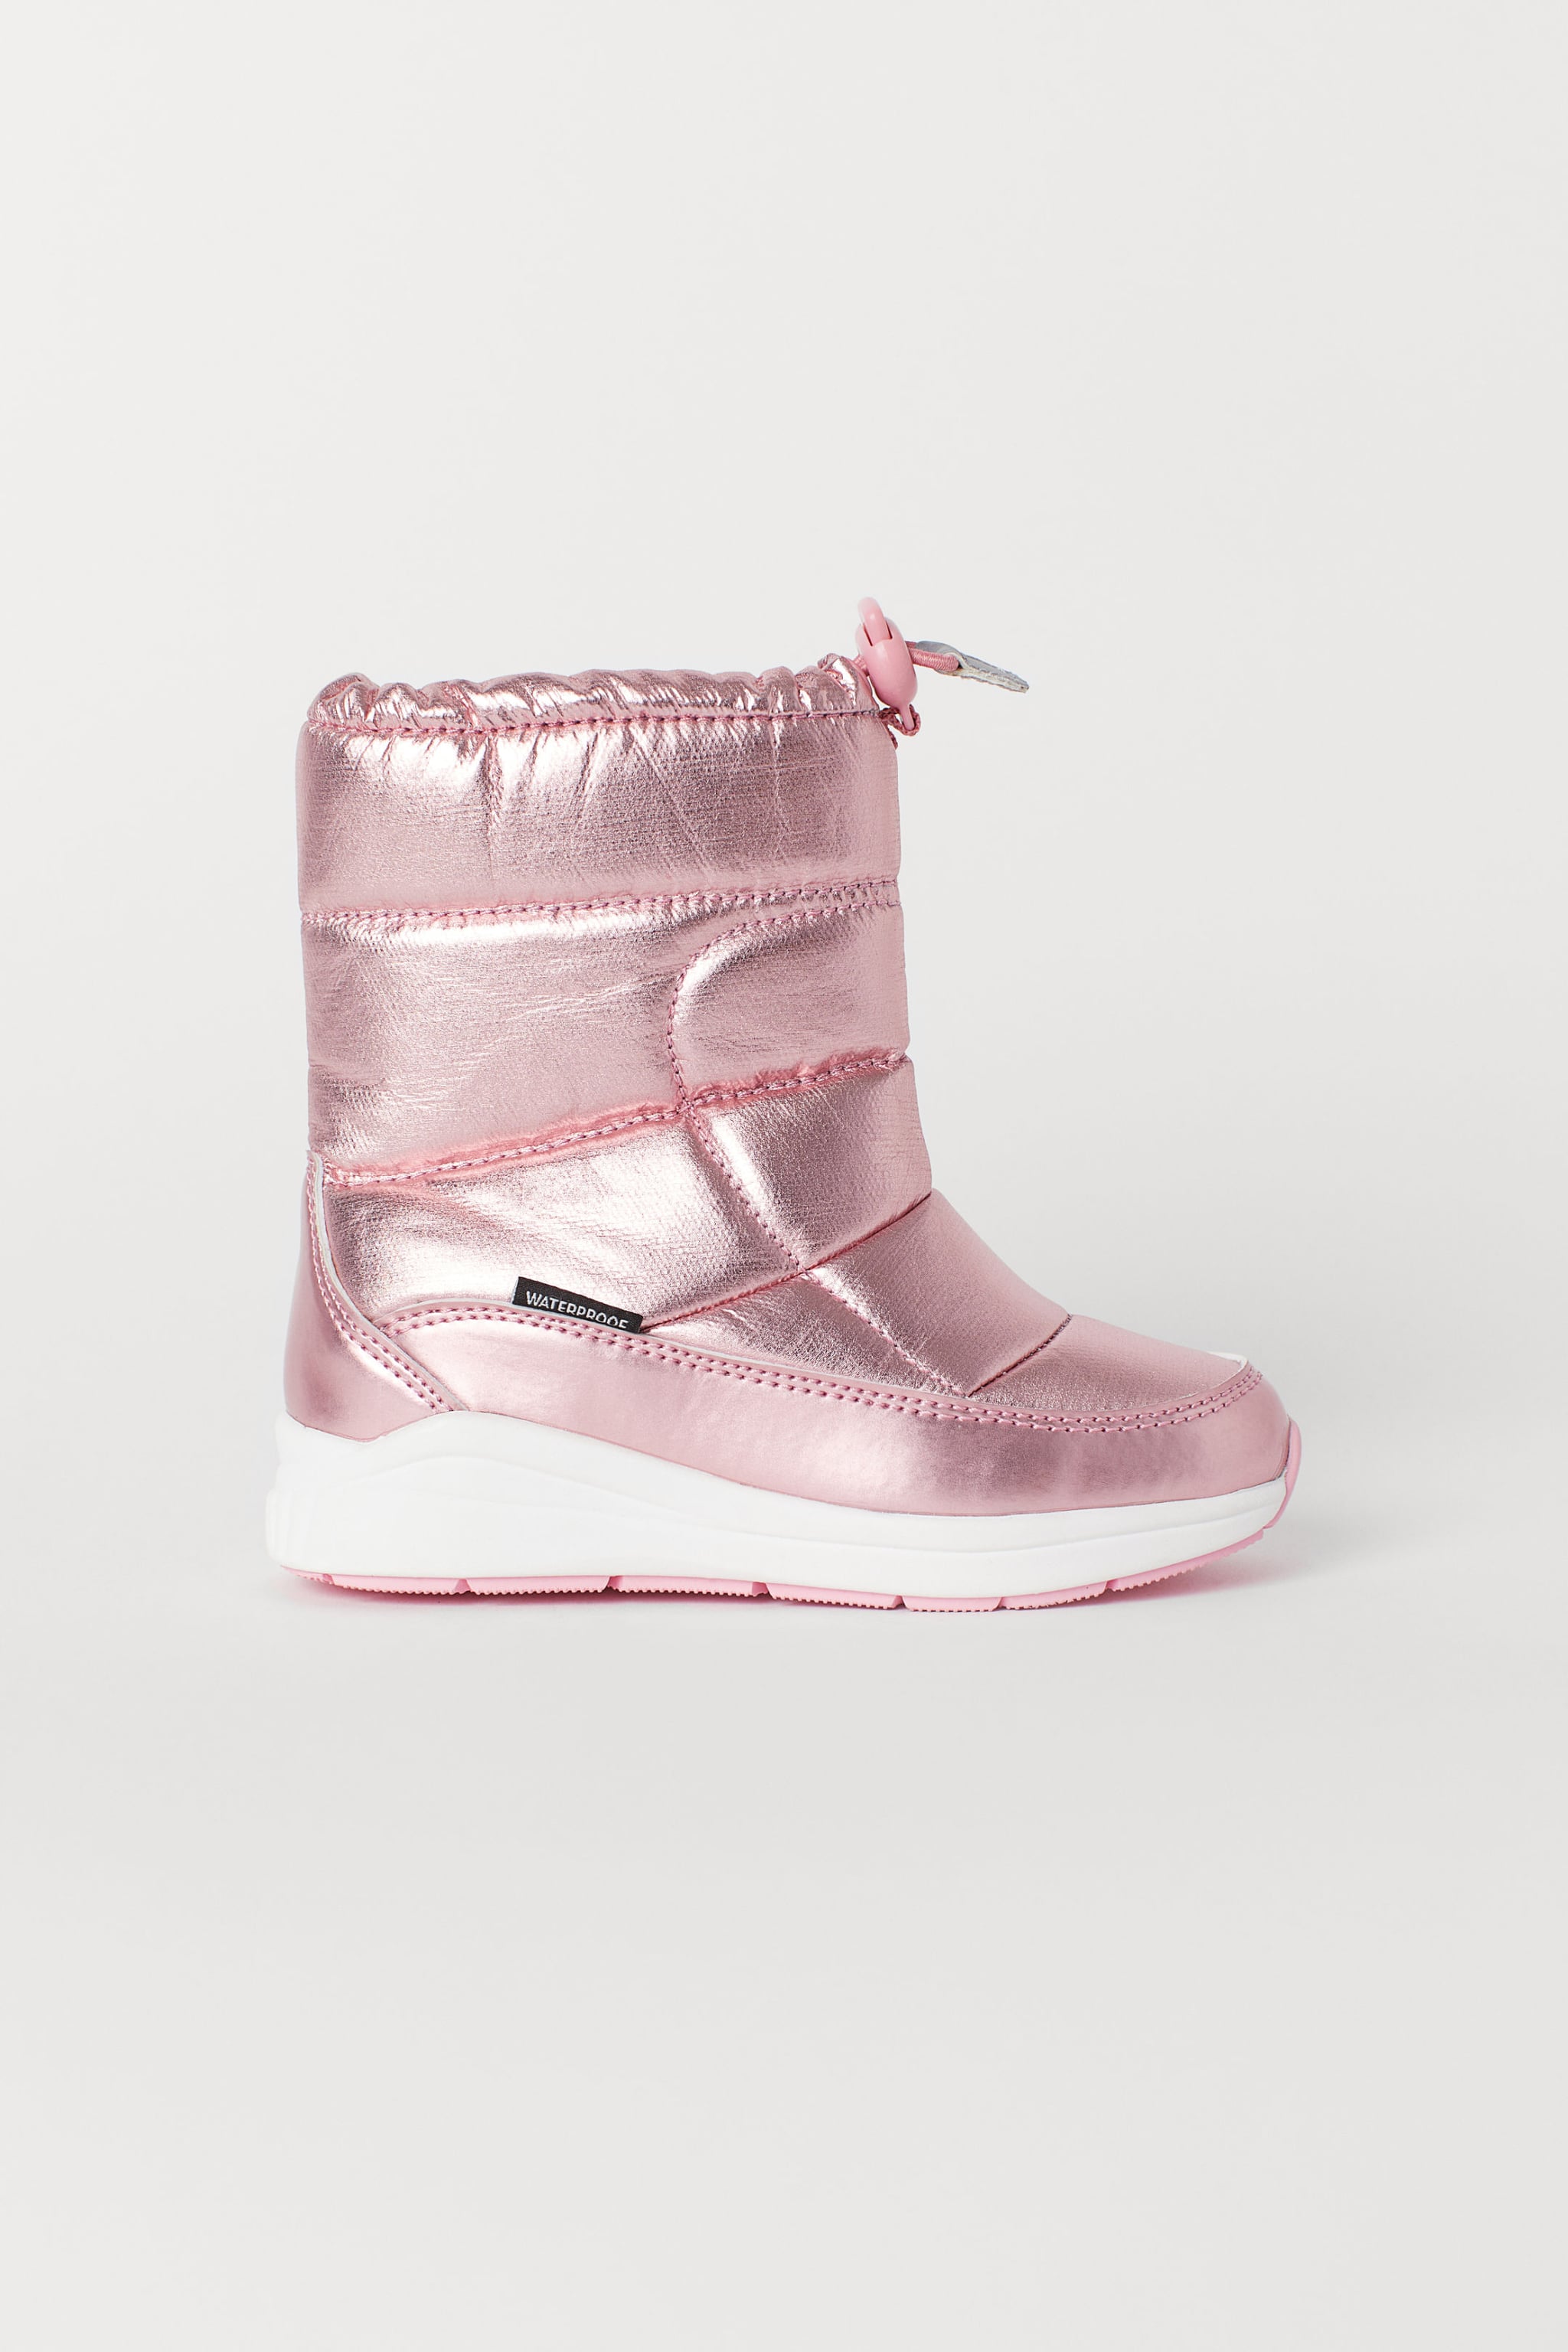 h&m winter boots